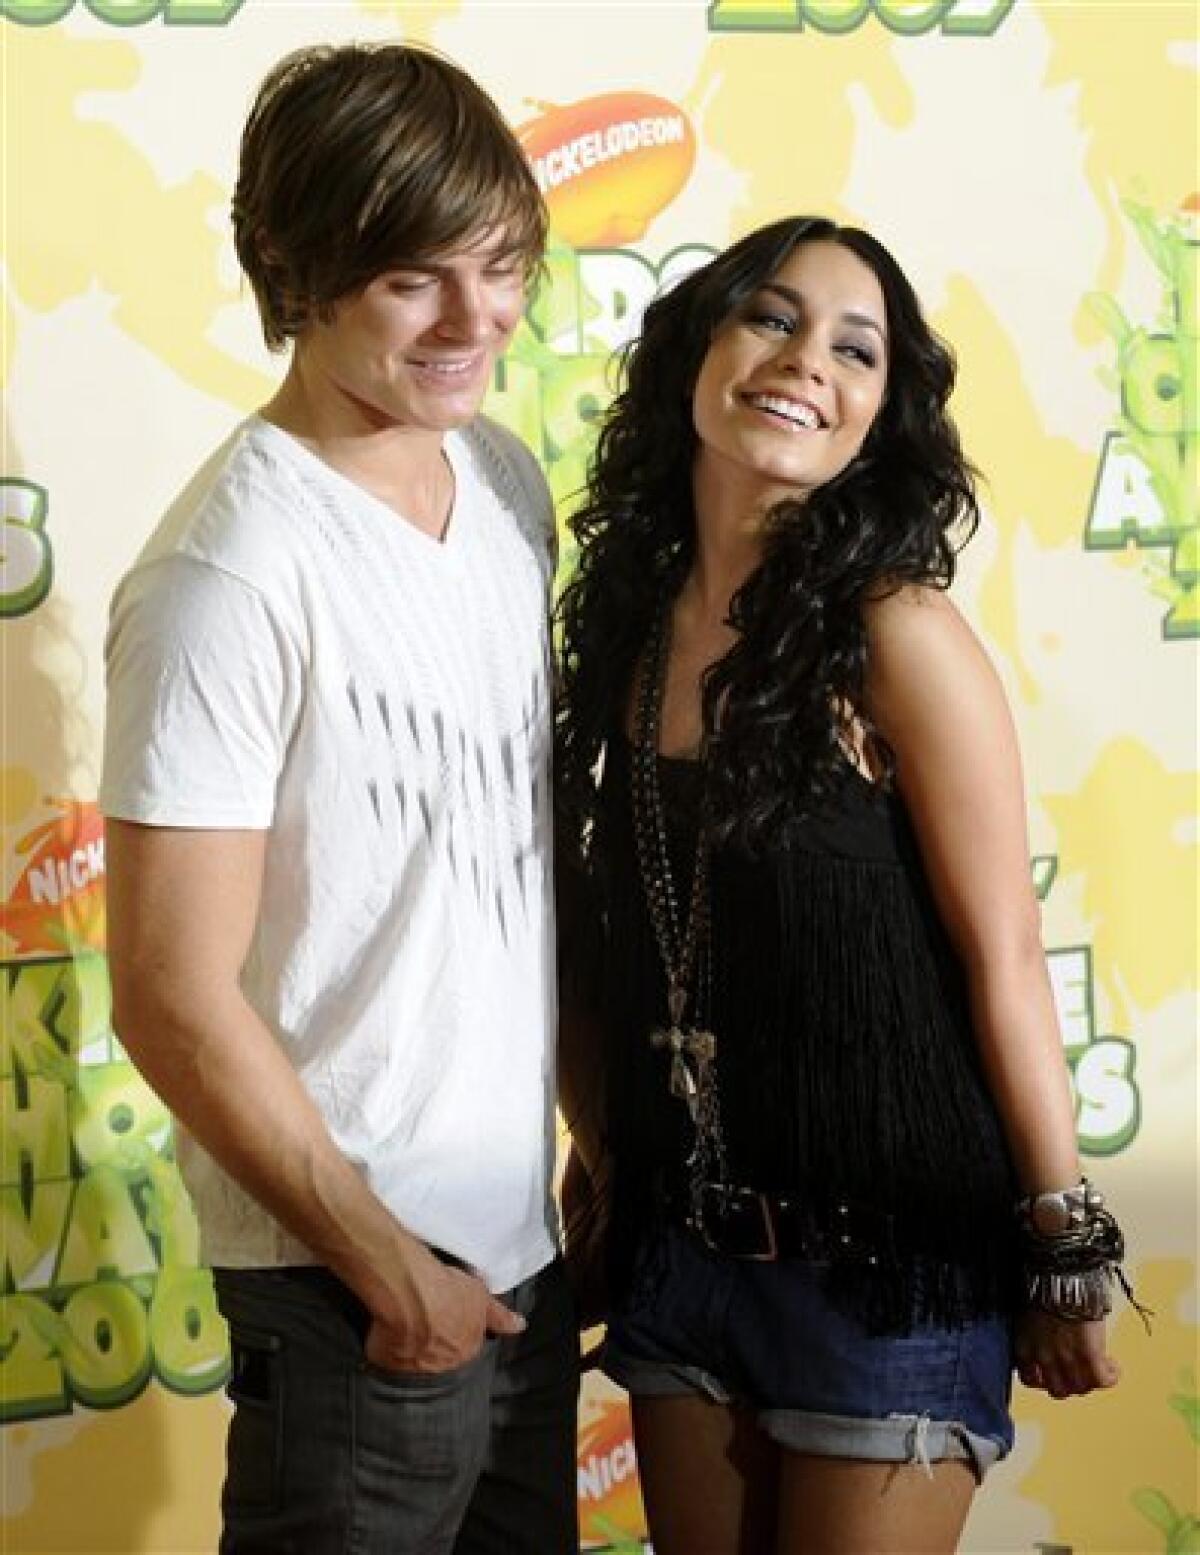 Zac Efron and Vanessa Hudgens arrive at the 22nd Annual Kids' Choice Awards on Saturday, March 28, 2009, in Los Angeles. (AP Photo/Chris Pizzello)